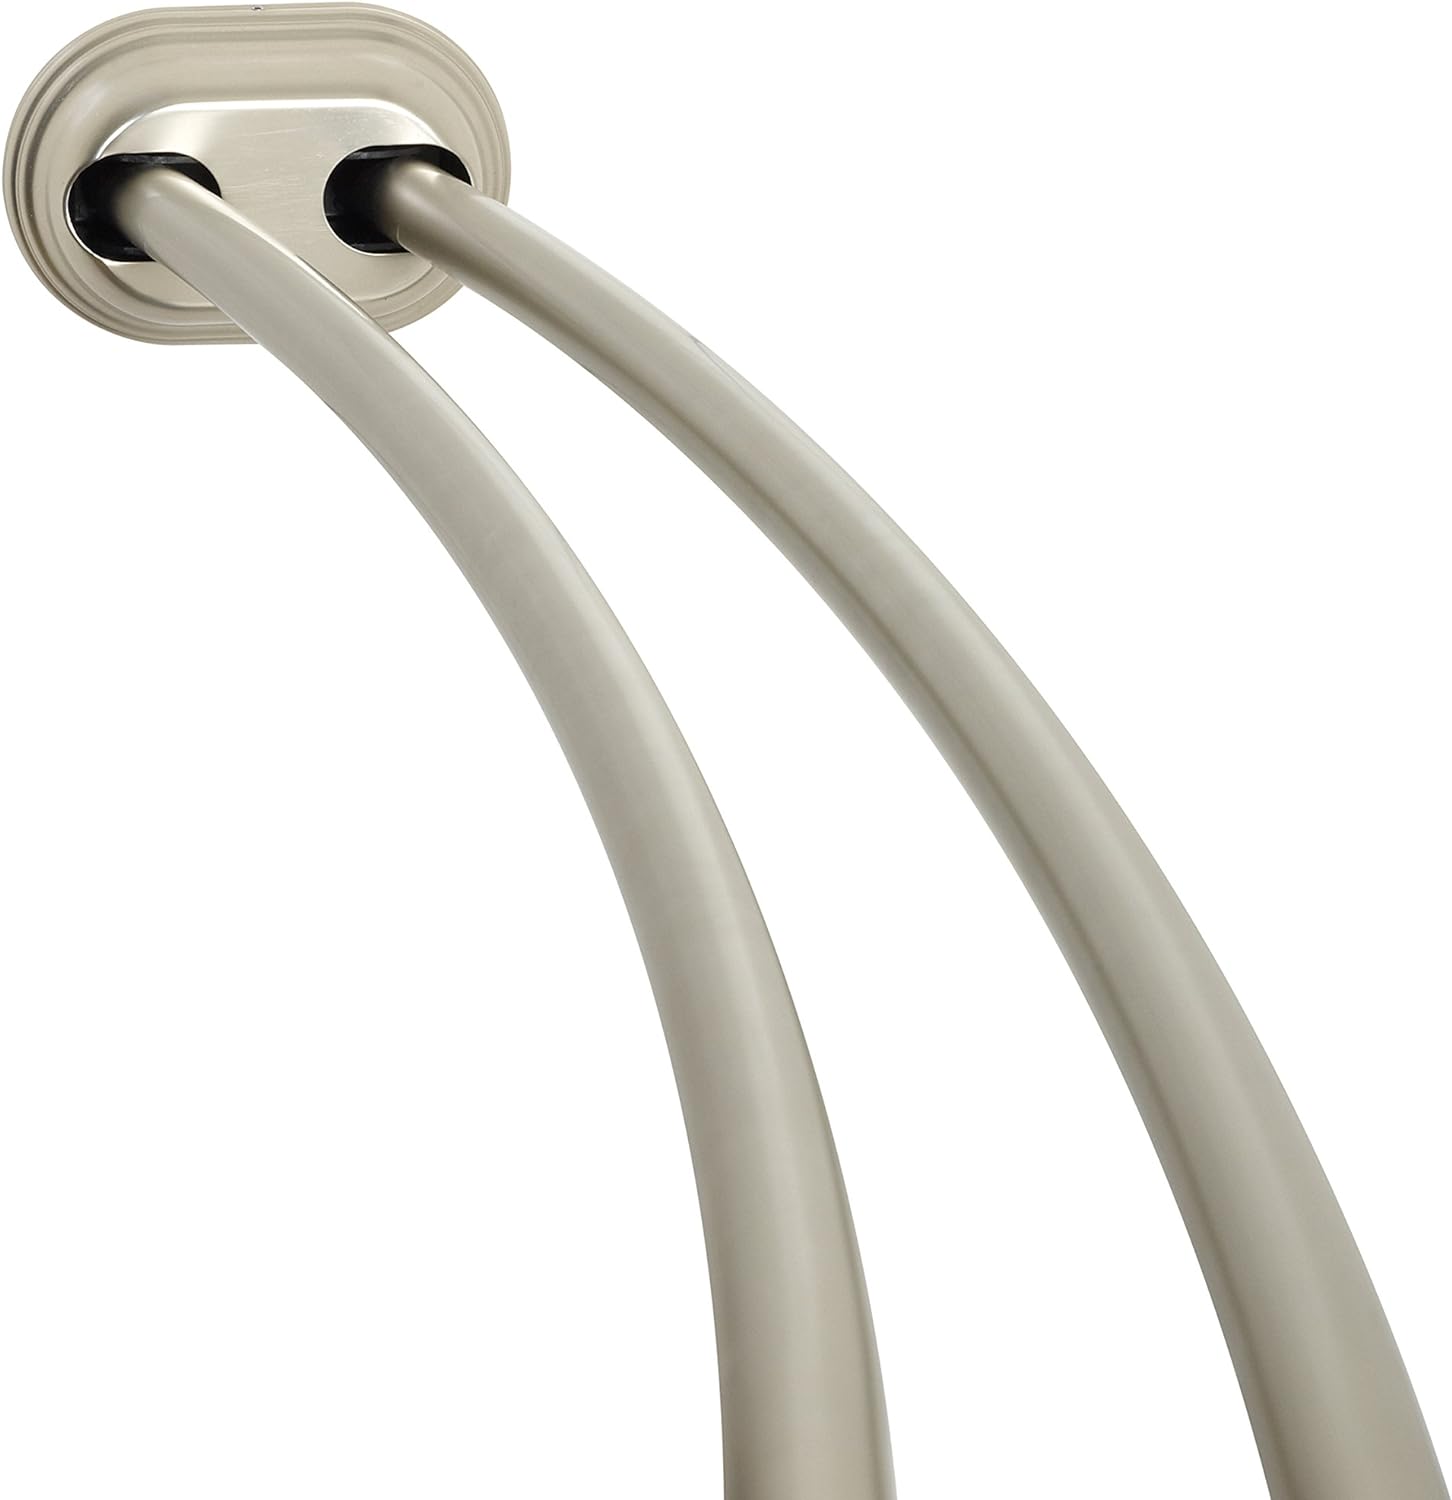 ZENITH PRODUCTS CORPORATION Zenna Home NeverRust Aluminum Double Curved Tension Shower Curtain Rod, 50 to 72-Inch, Satin Nickel